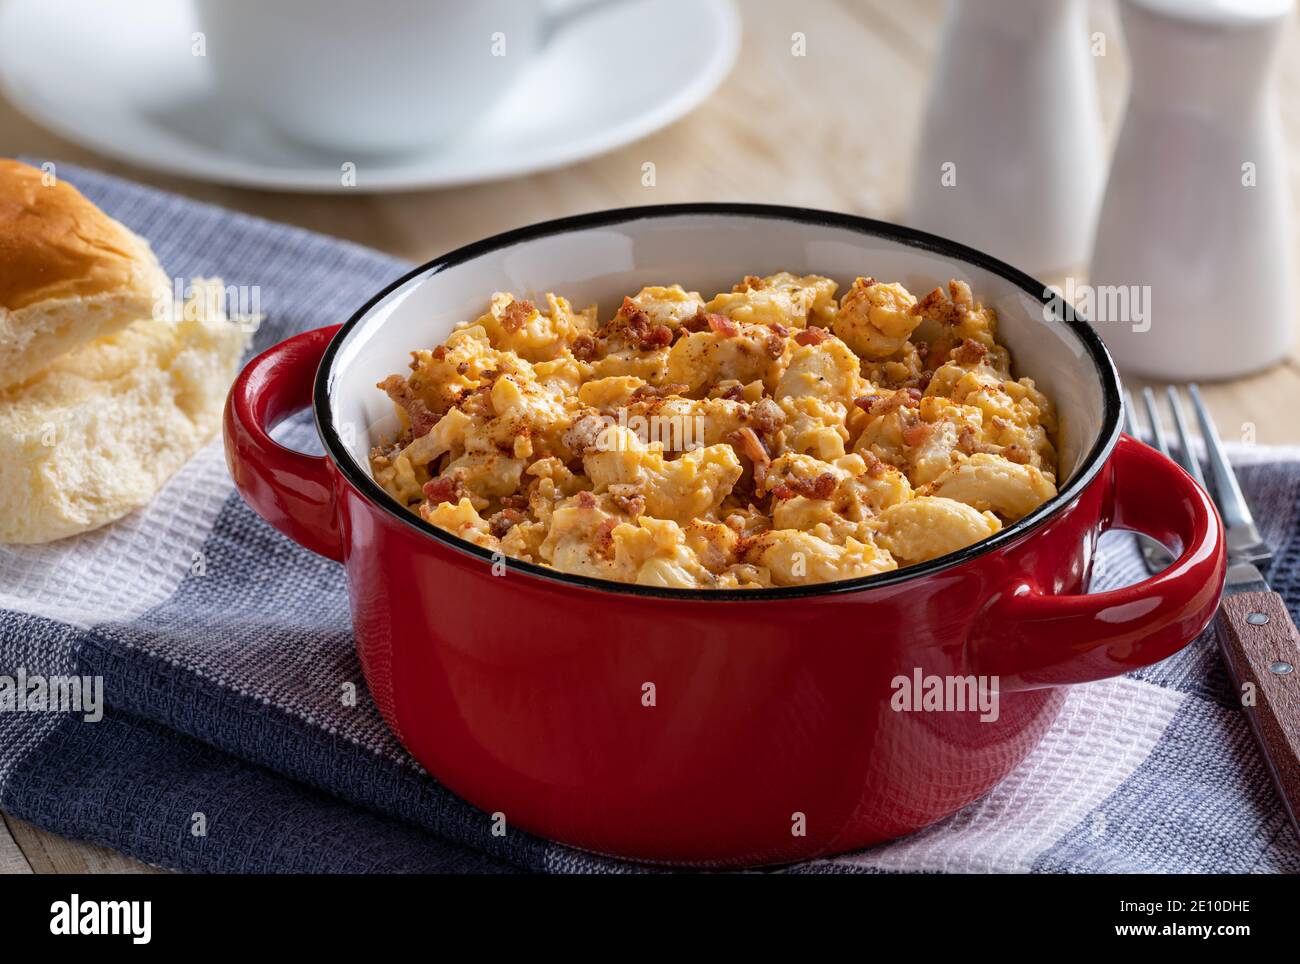 Closeup of a bowl of macaroni and cheese with bacon pieces on wooden table Stock Photo